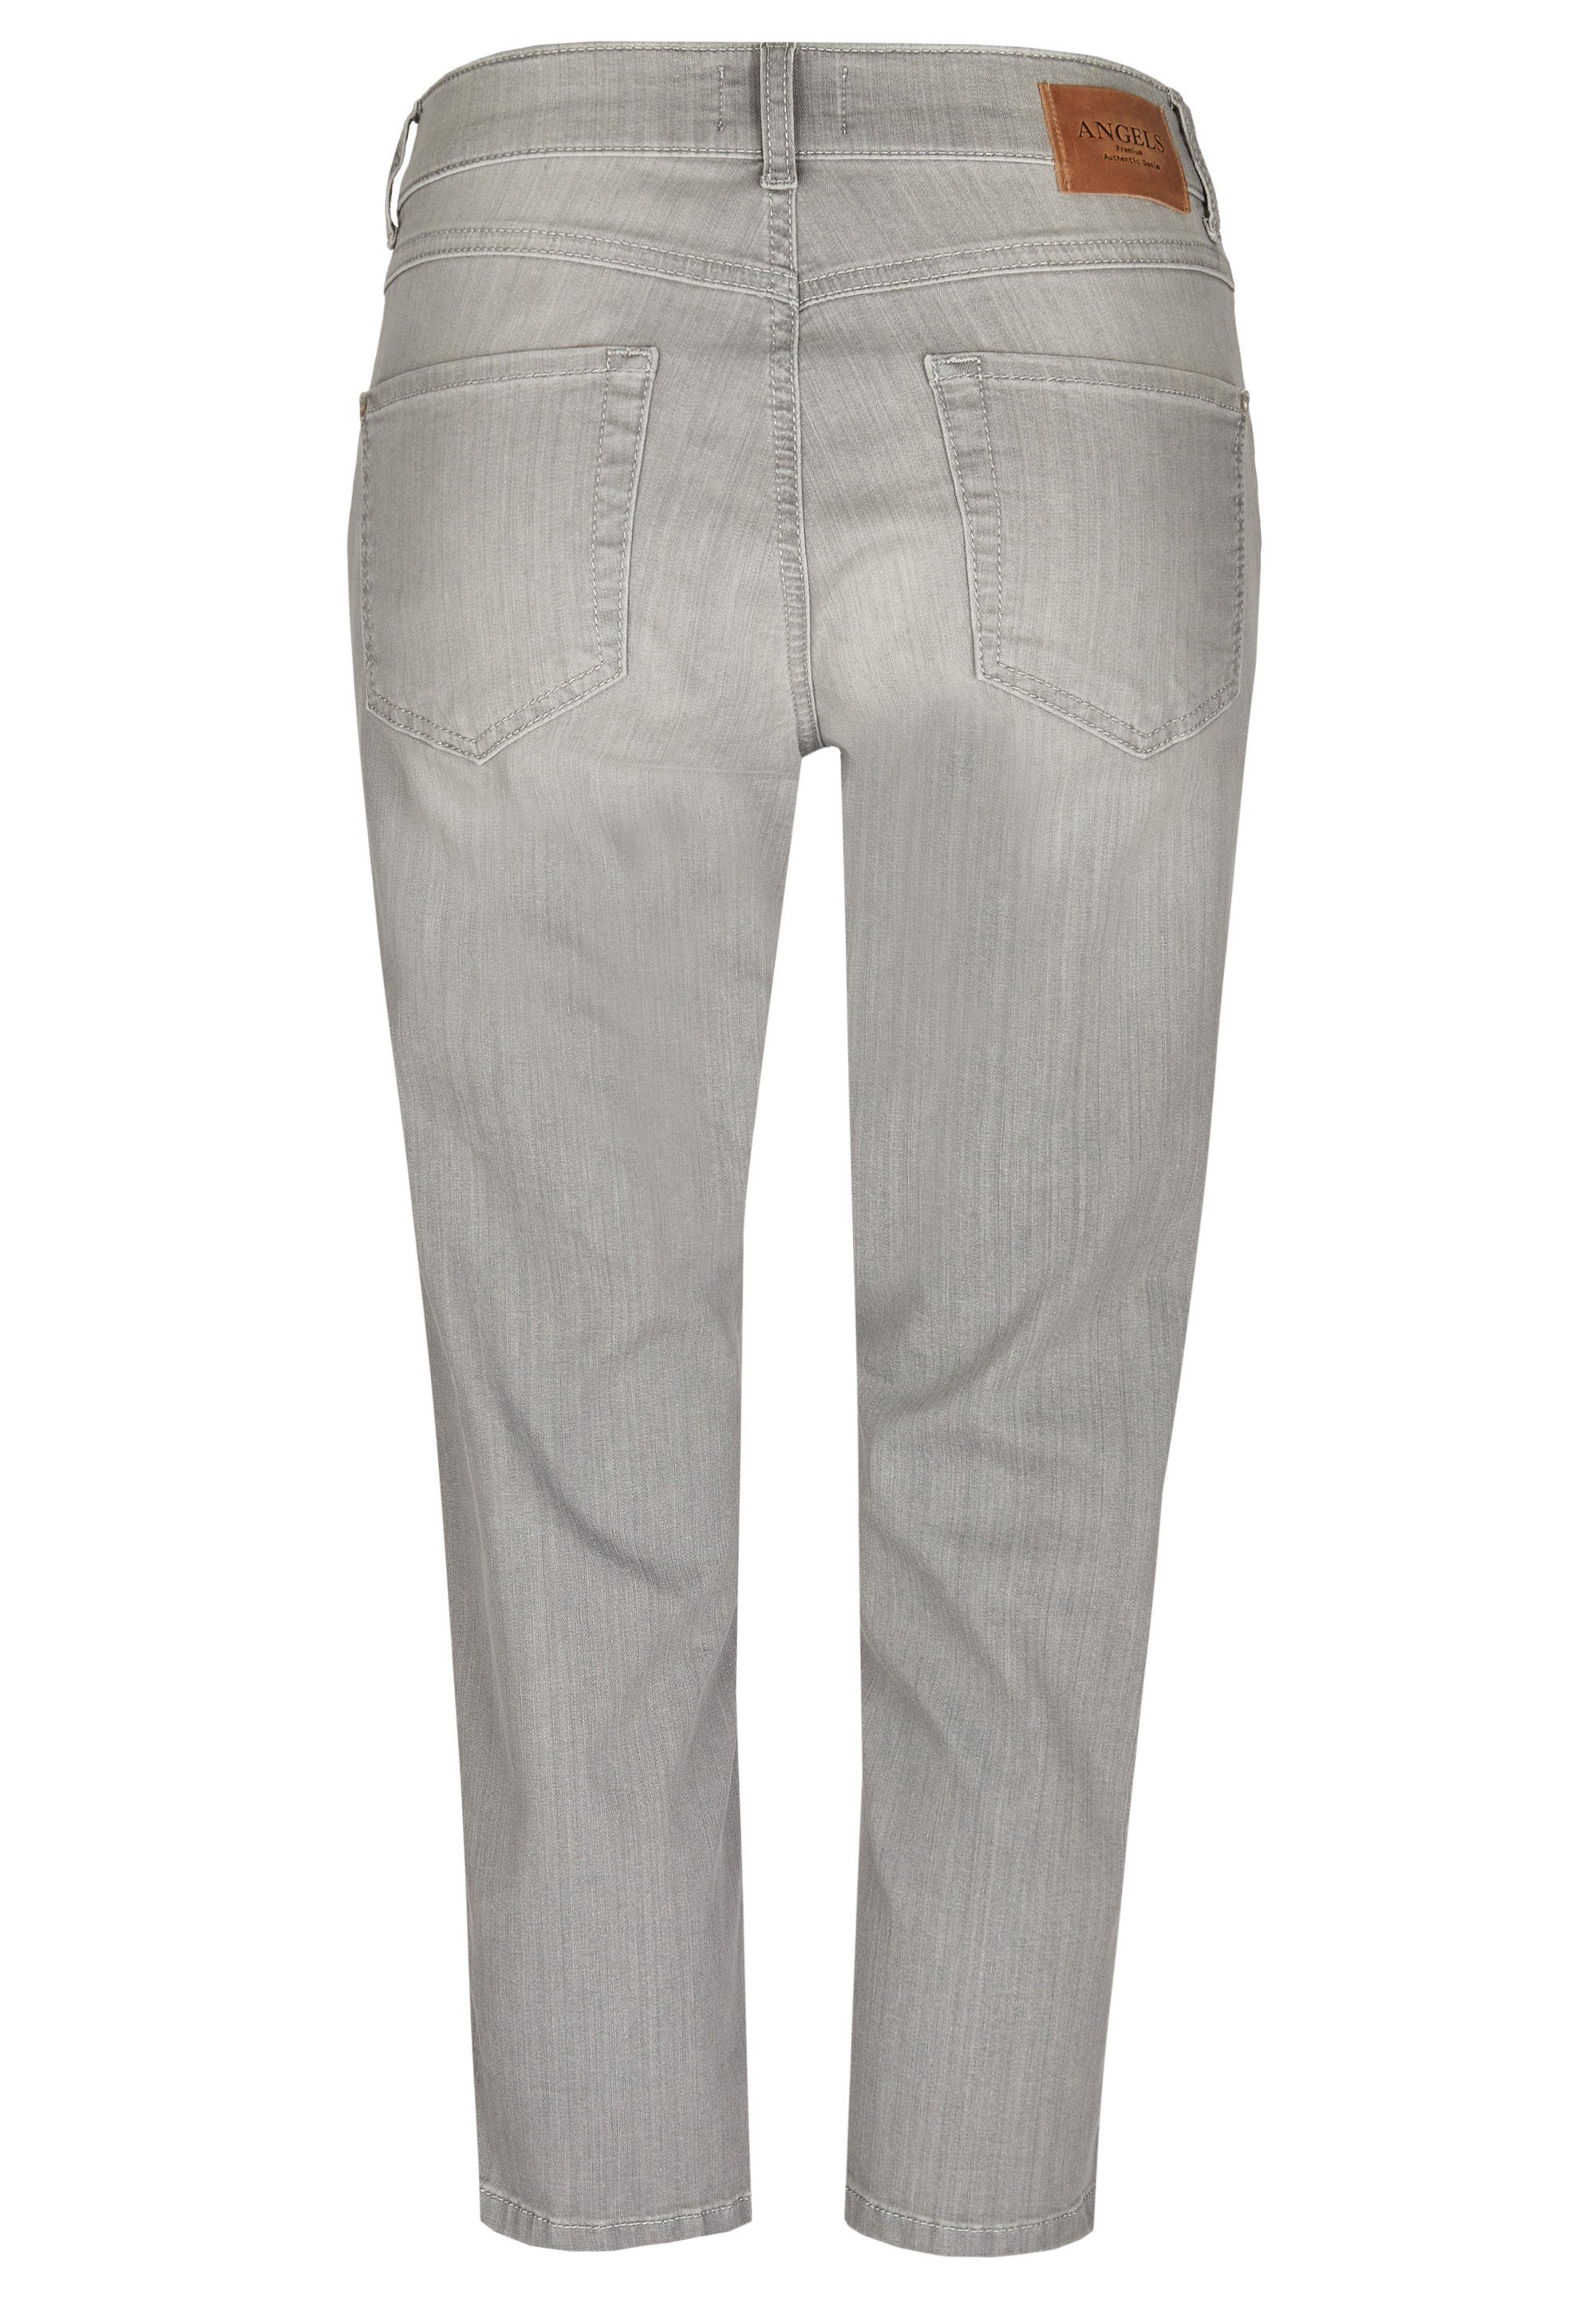 ANGELS Stretch-Jeans ANGELS JEANS 750000.1458 332 used CICI TU grey light grey used light 1458